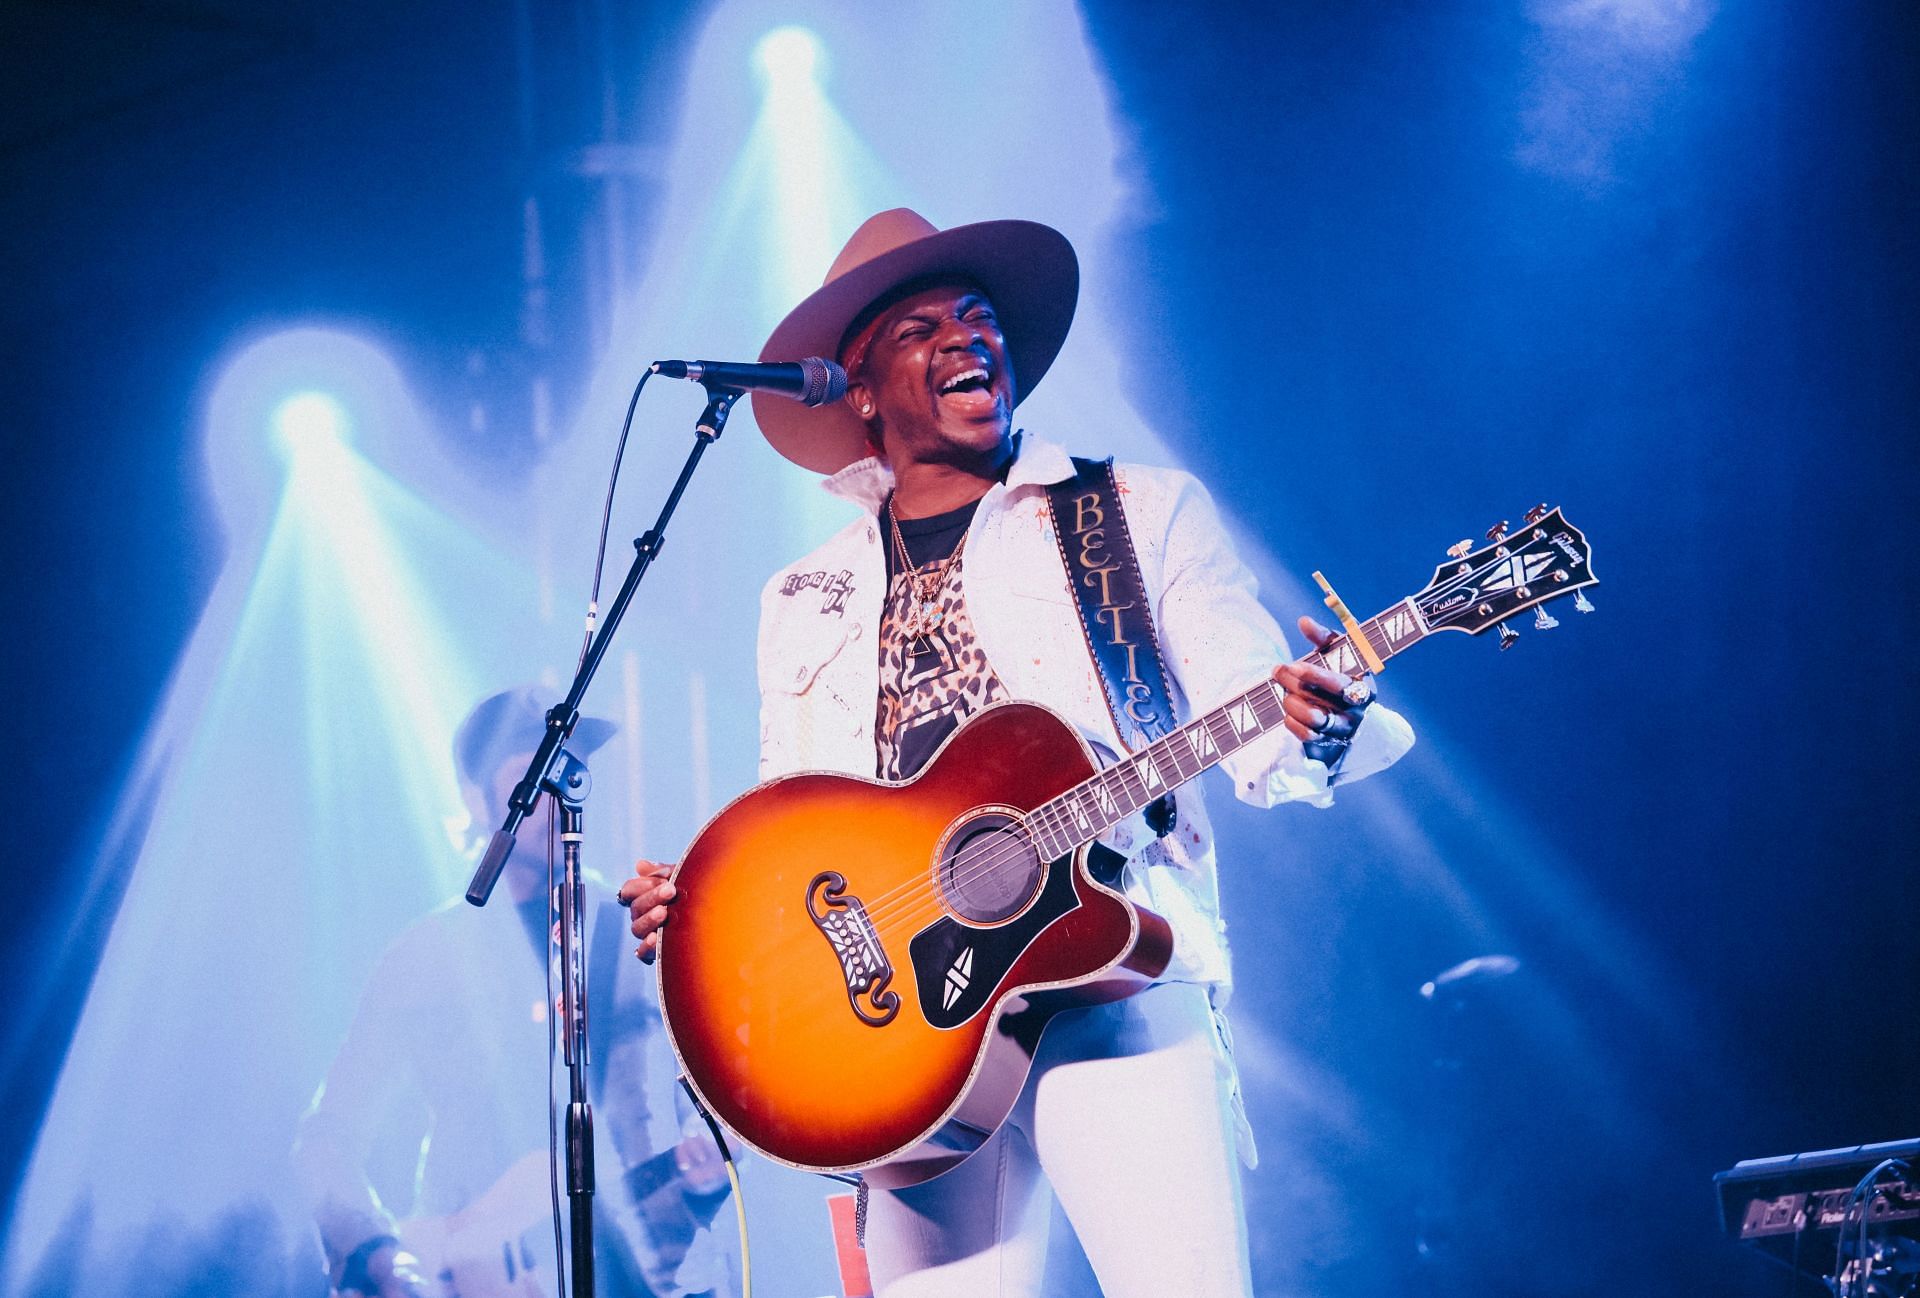 Dustin Lynch With Special Guests: Jimmie Allen And LOCASH Live Stream Concert (Image via Getty/Jason Kempin)